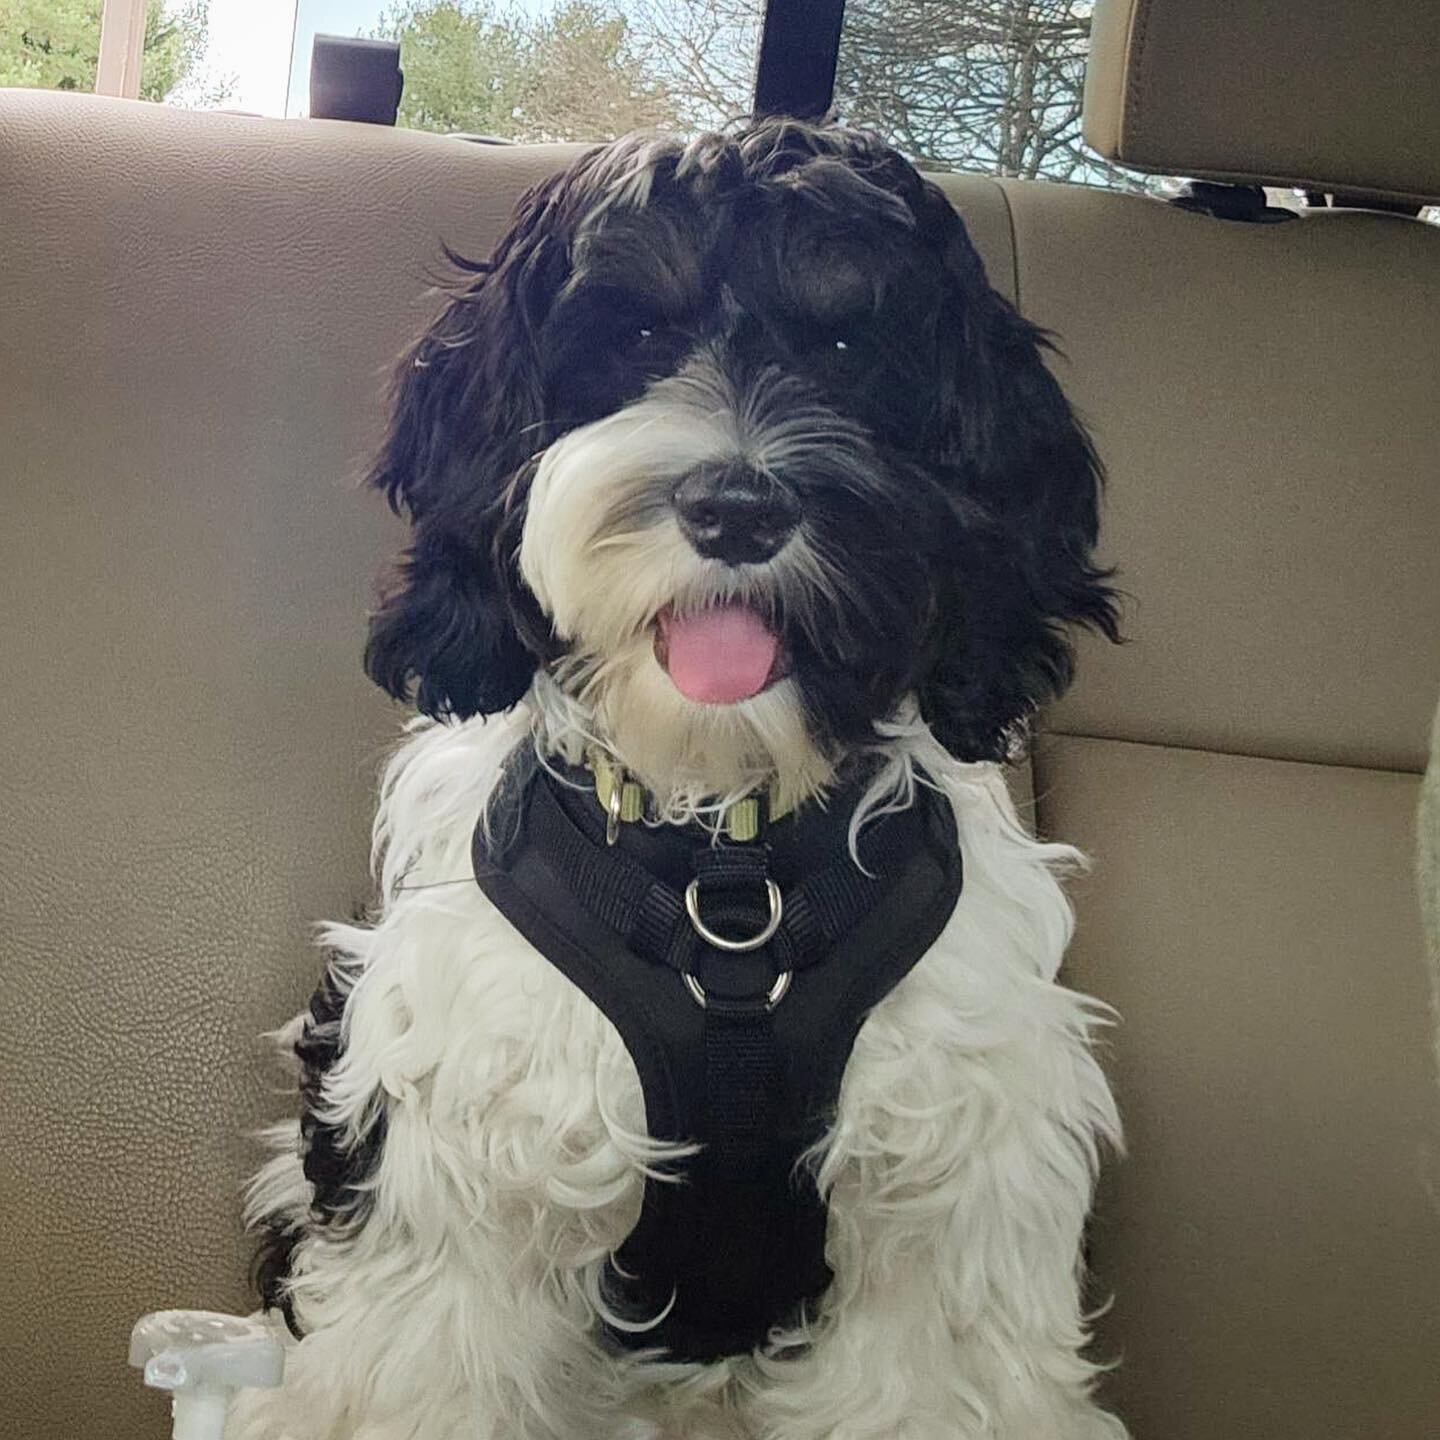 ❤️Puppy Update: Leo from Max&rsquo;s Zodiac litter is now Rooster! He&rsquo;s doing great, and a very happy boy! He loves playing with his neighbor and half-brother @percival.the.cockapoo ! You can keep up with Rooster here: @rooster_thecockadoodle